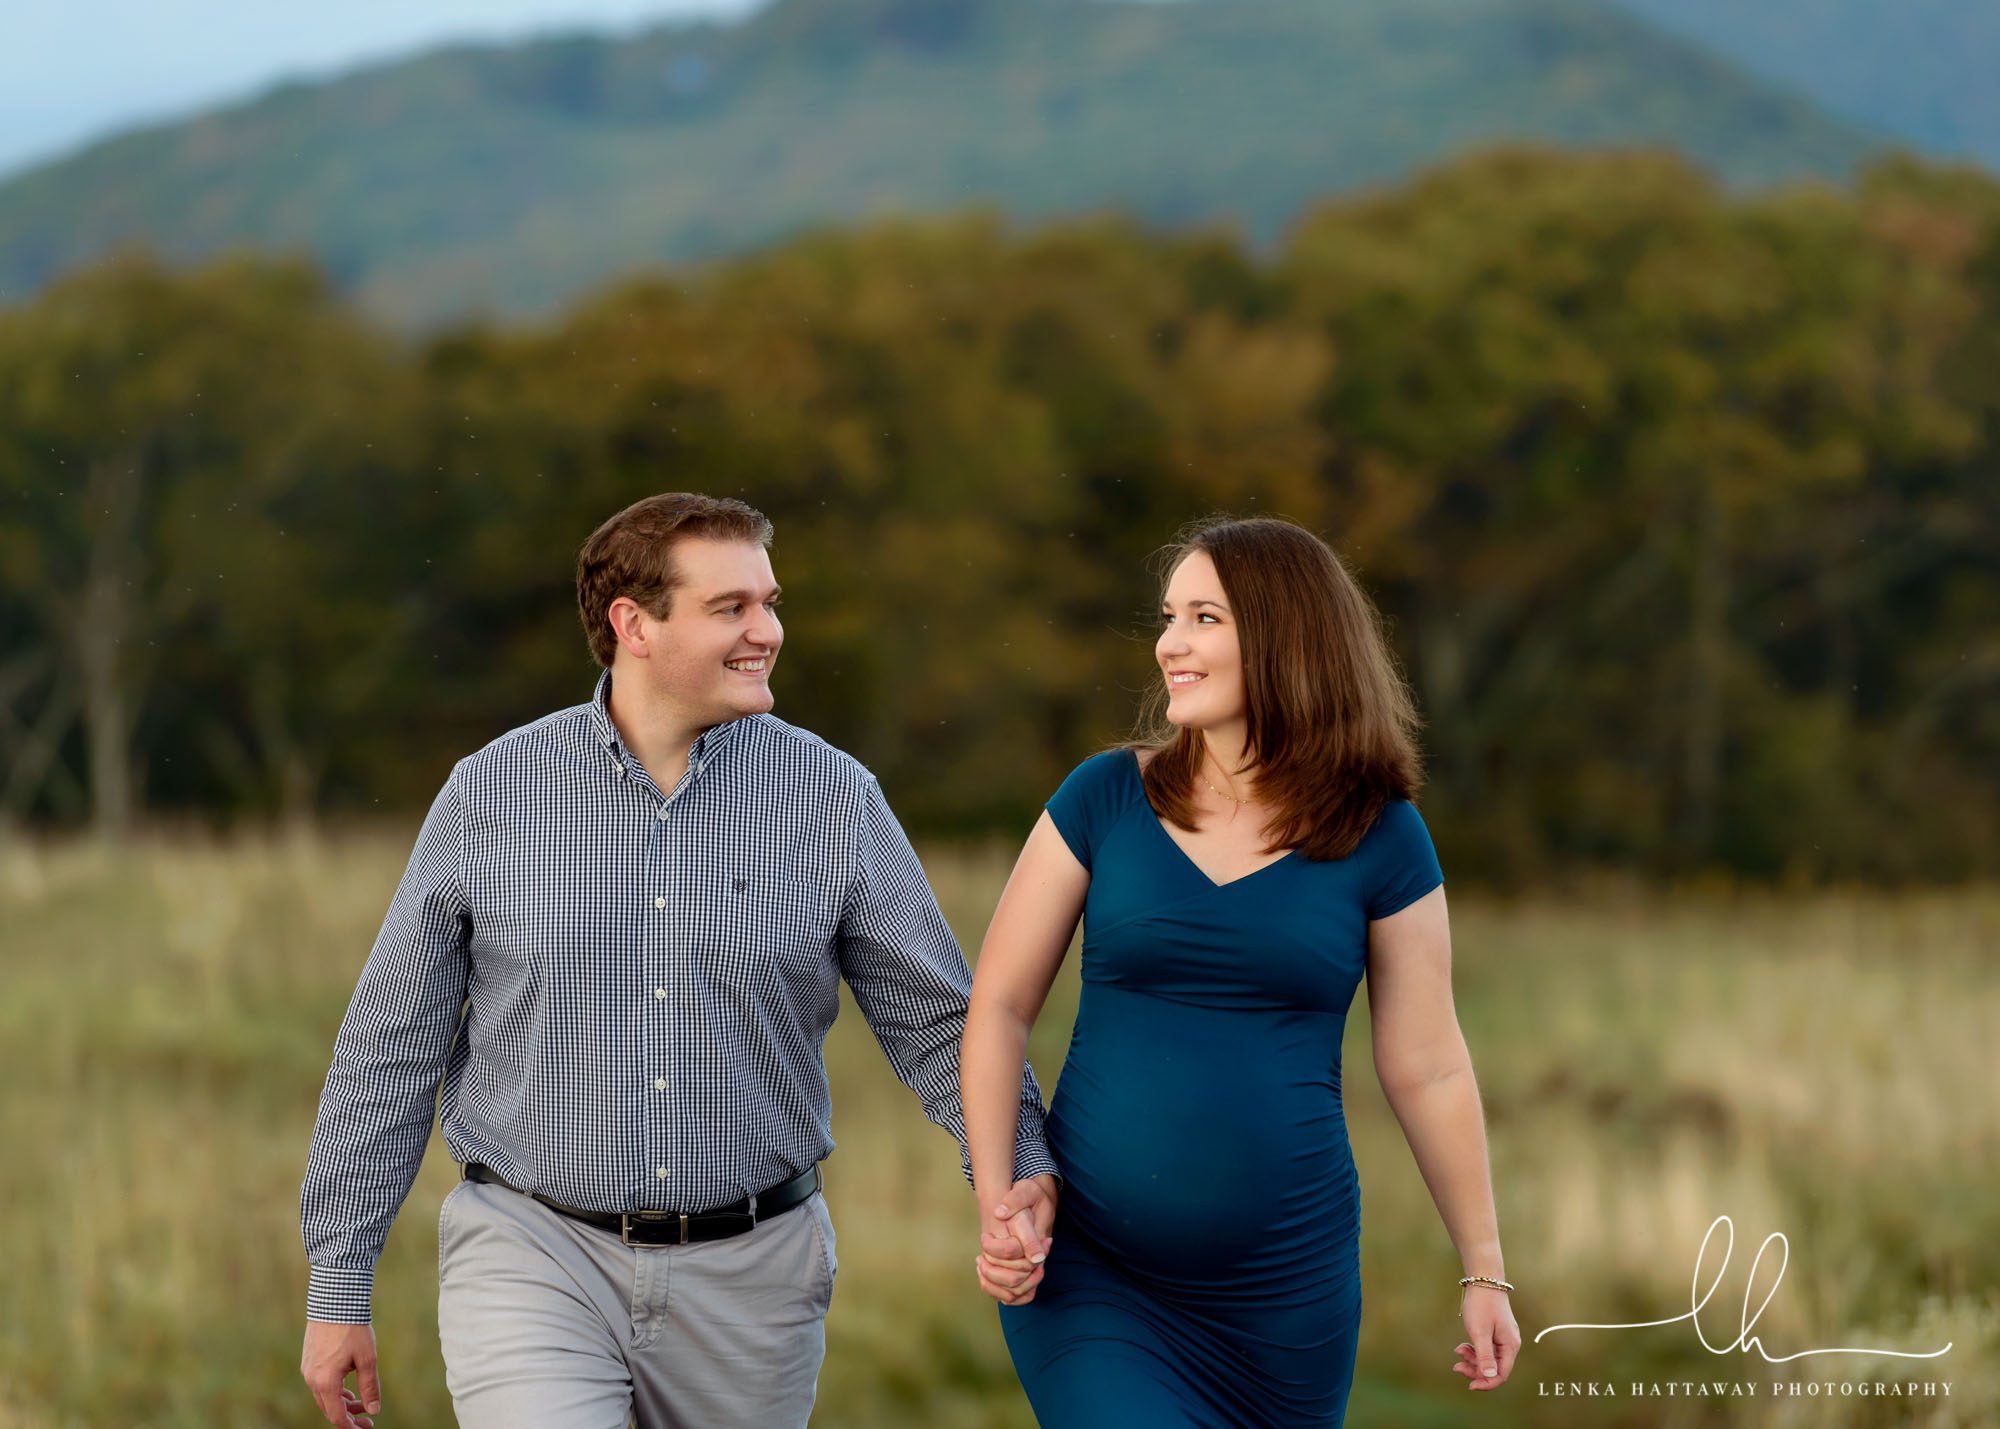 Maternity photography in the Blue Ridge Mountains.